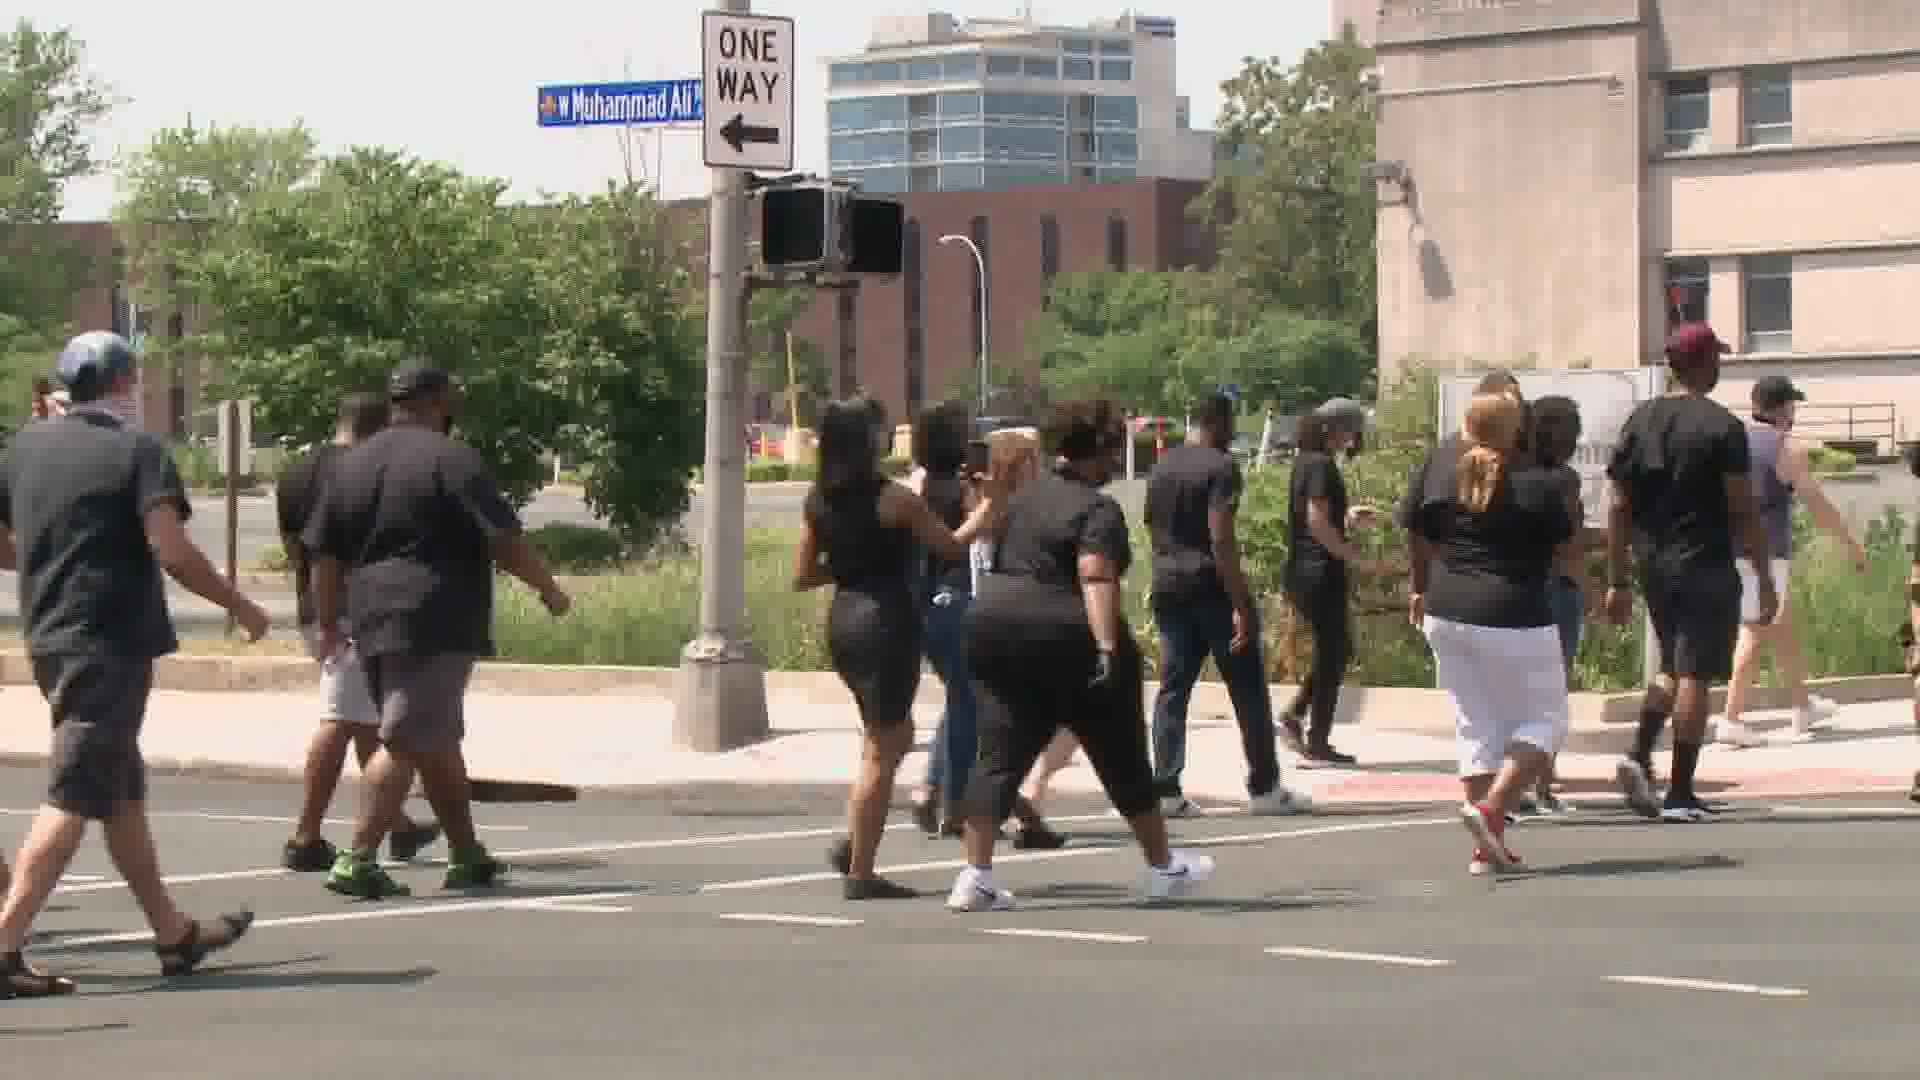 As many continue their marches for justice, Louisville's black attorneys are calling for criminal justice reform.